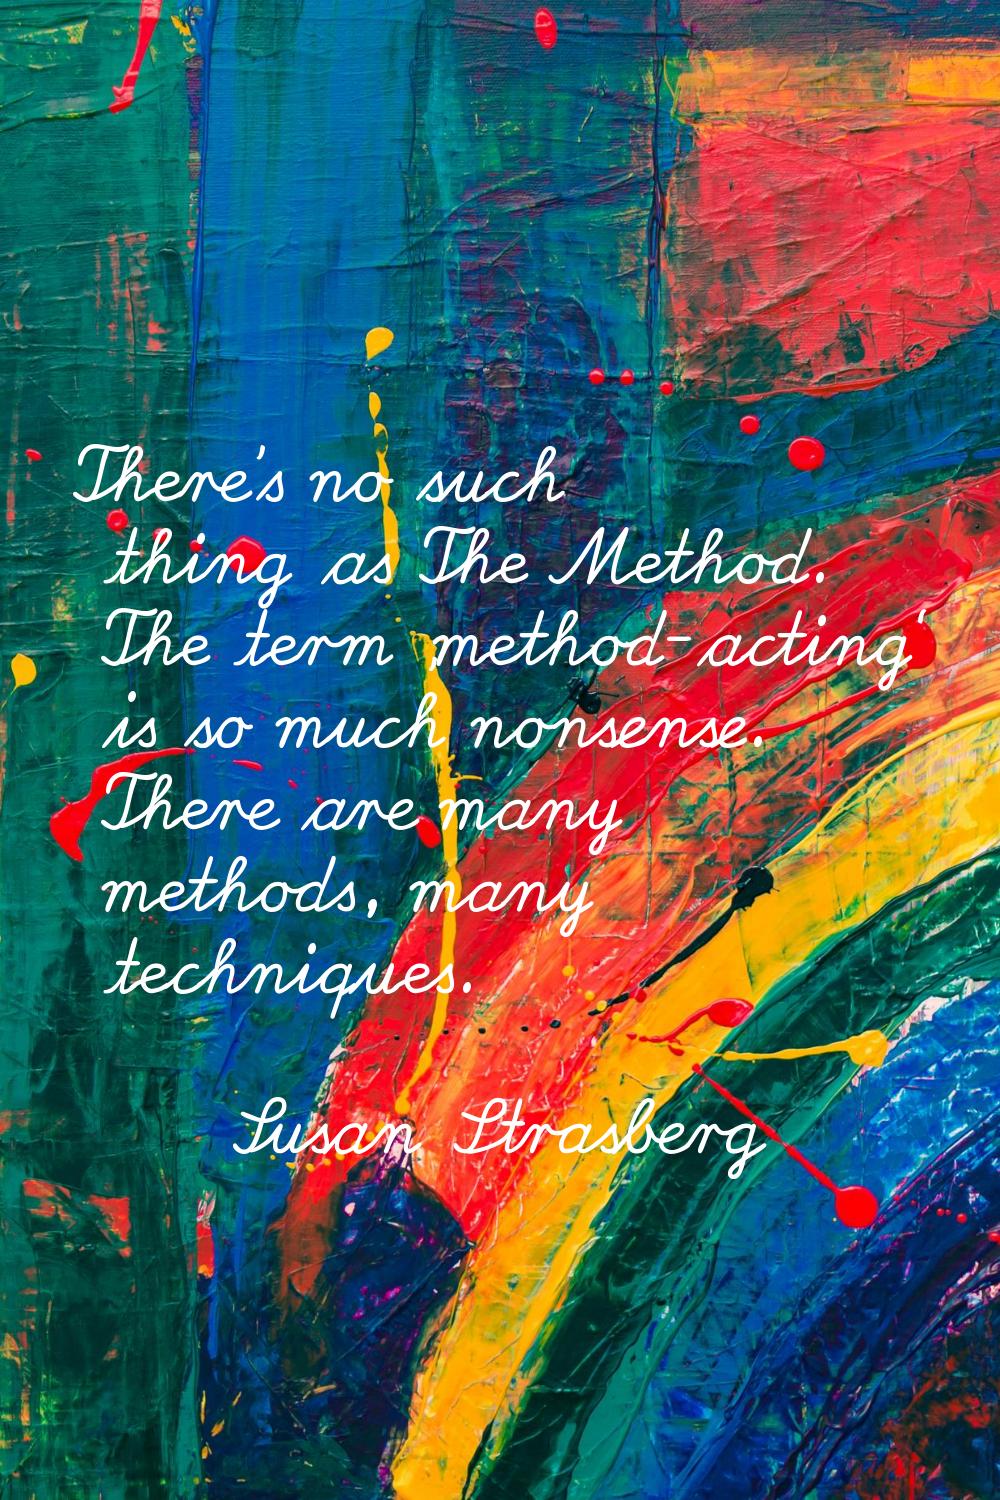 There's no such thing as The Method. The term 'method-acting' is so much nonsense. There are many m